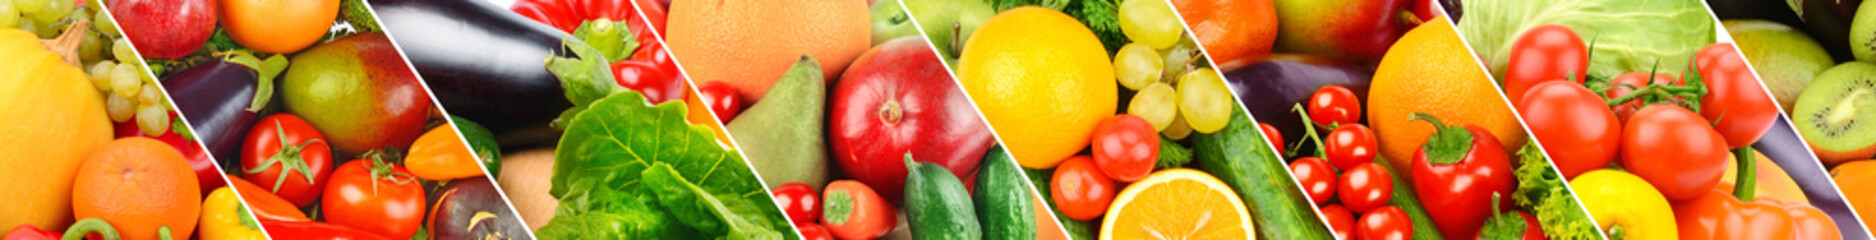 Different useful fruits and vegetables background. Wide photo.